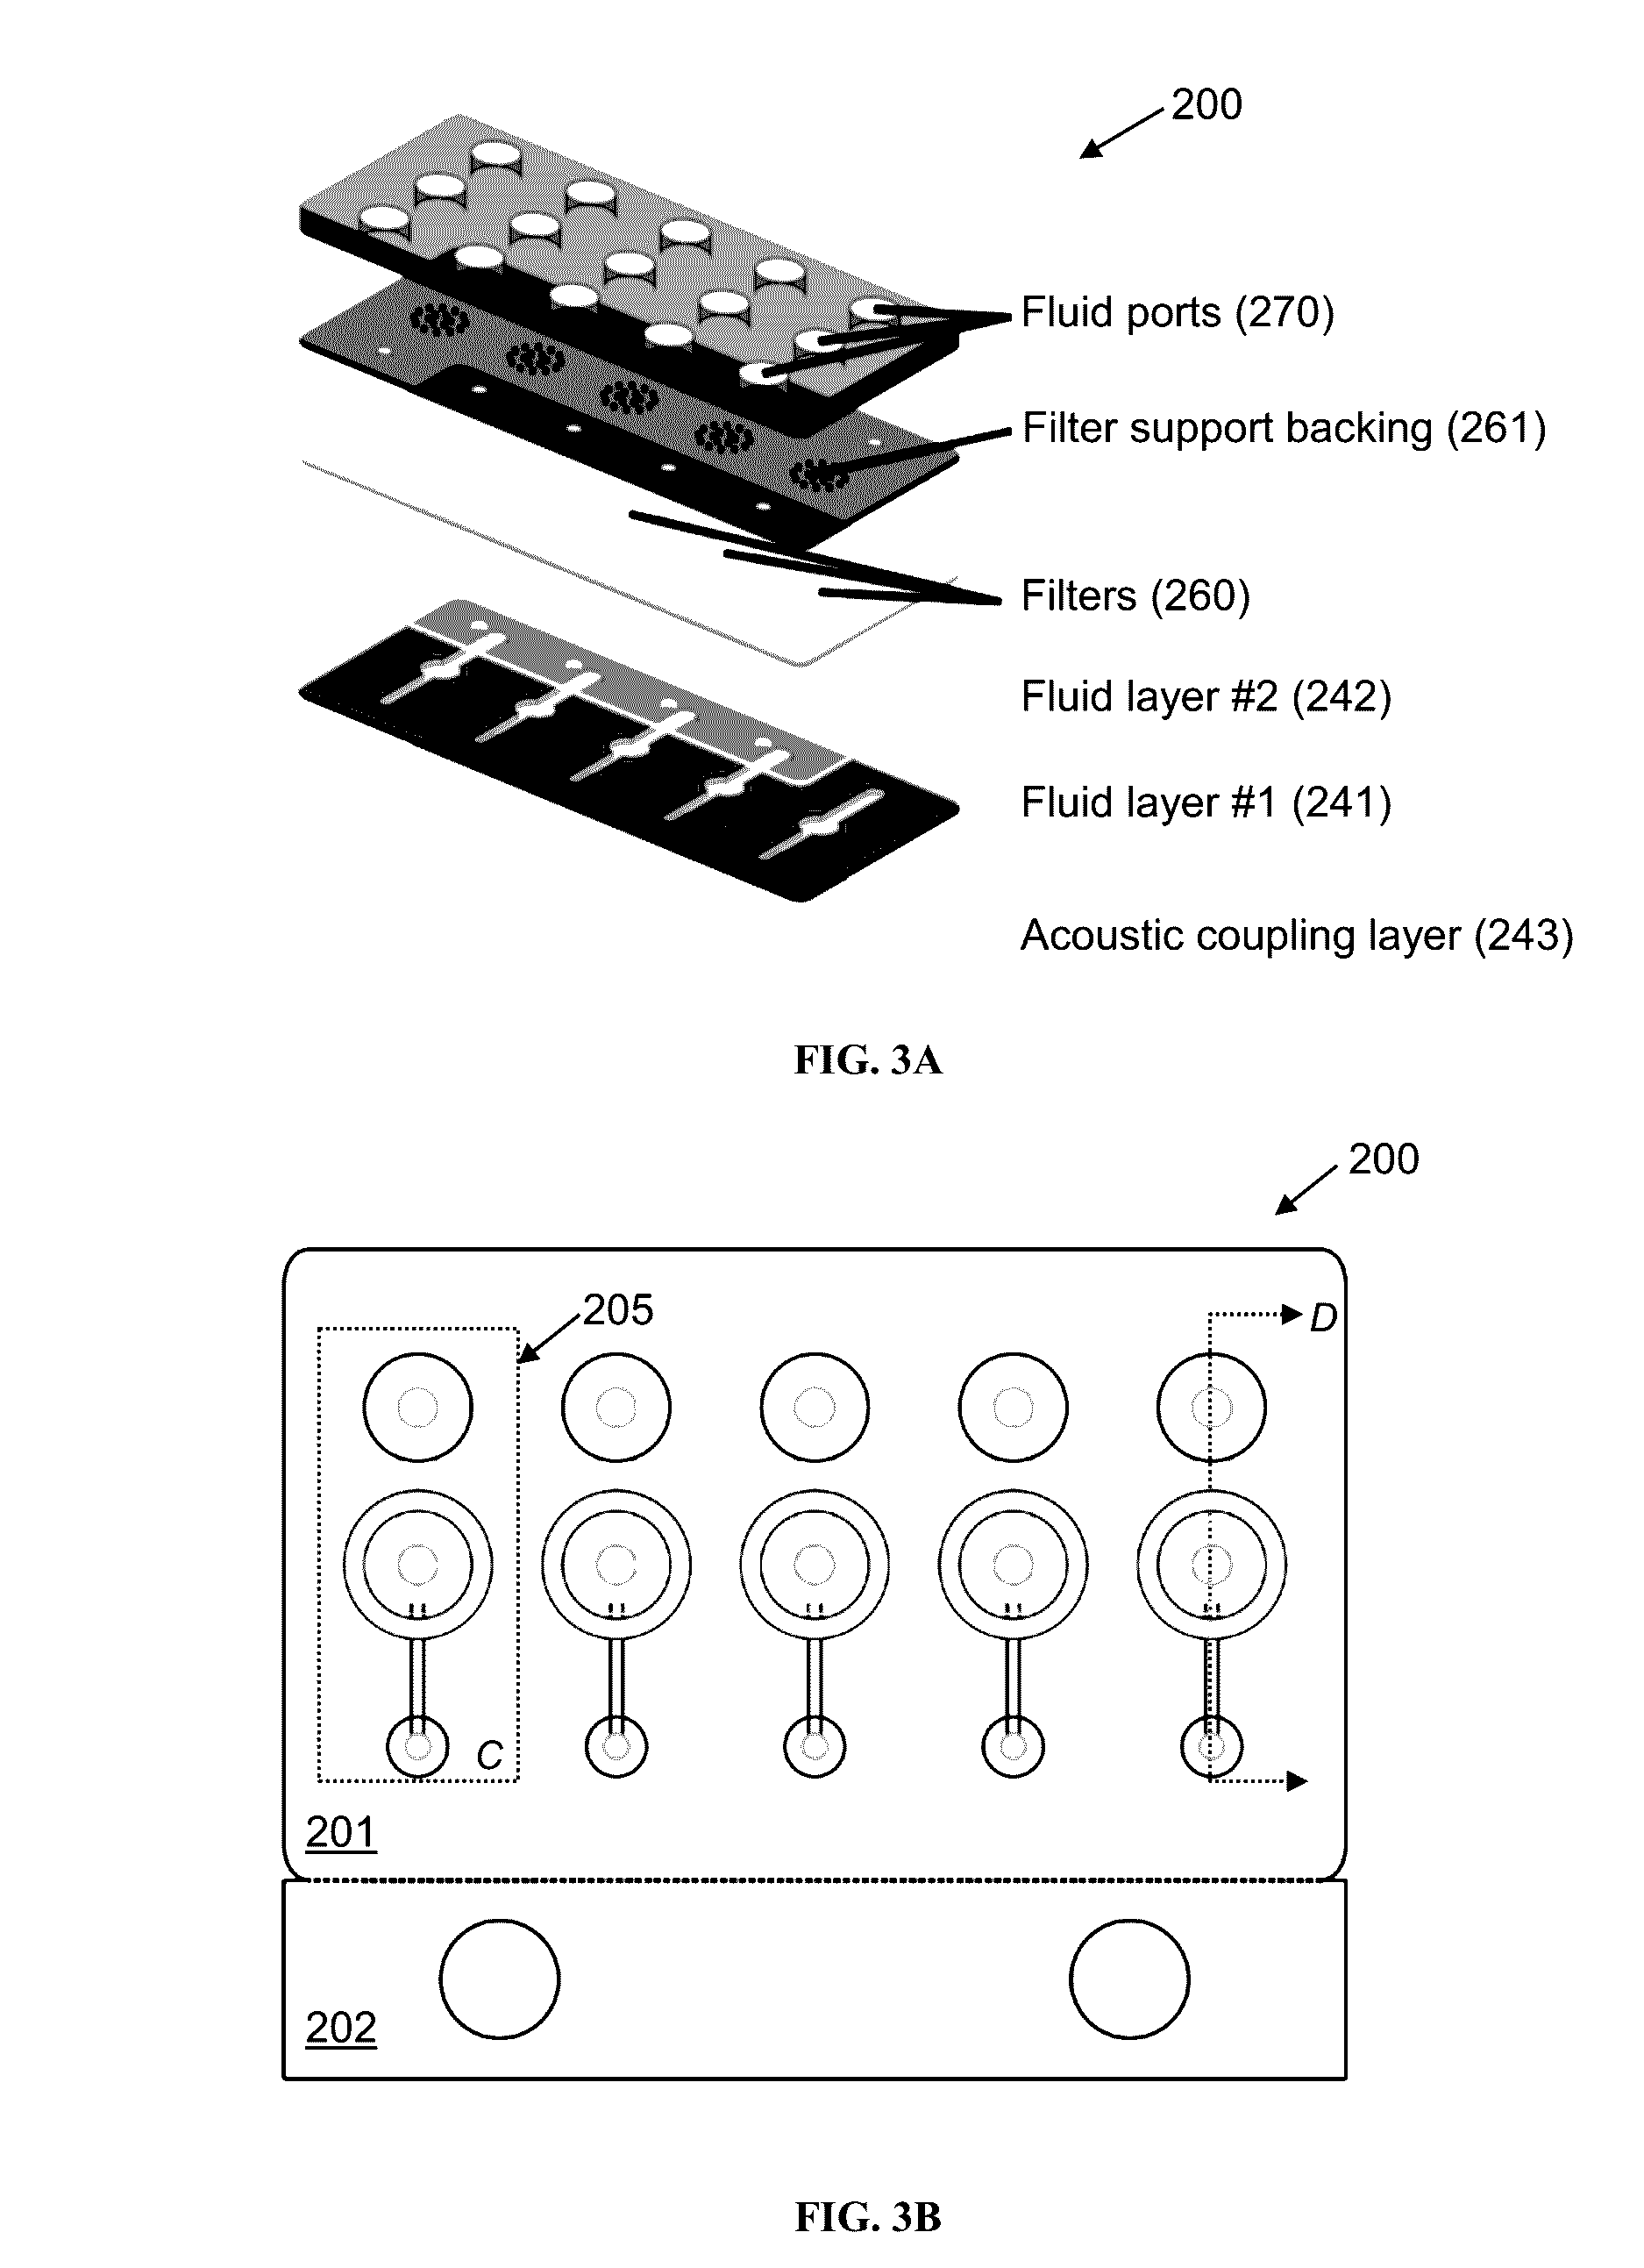 Miniature acoustic wave lysis system and uses thereof